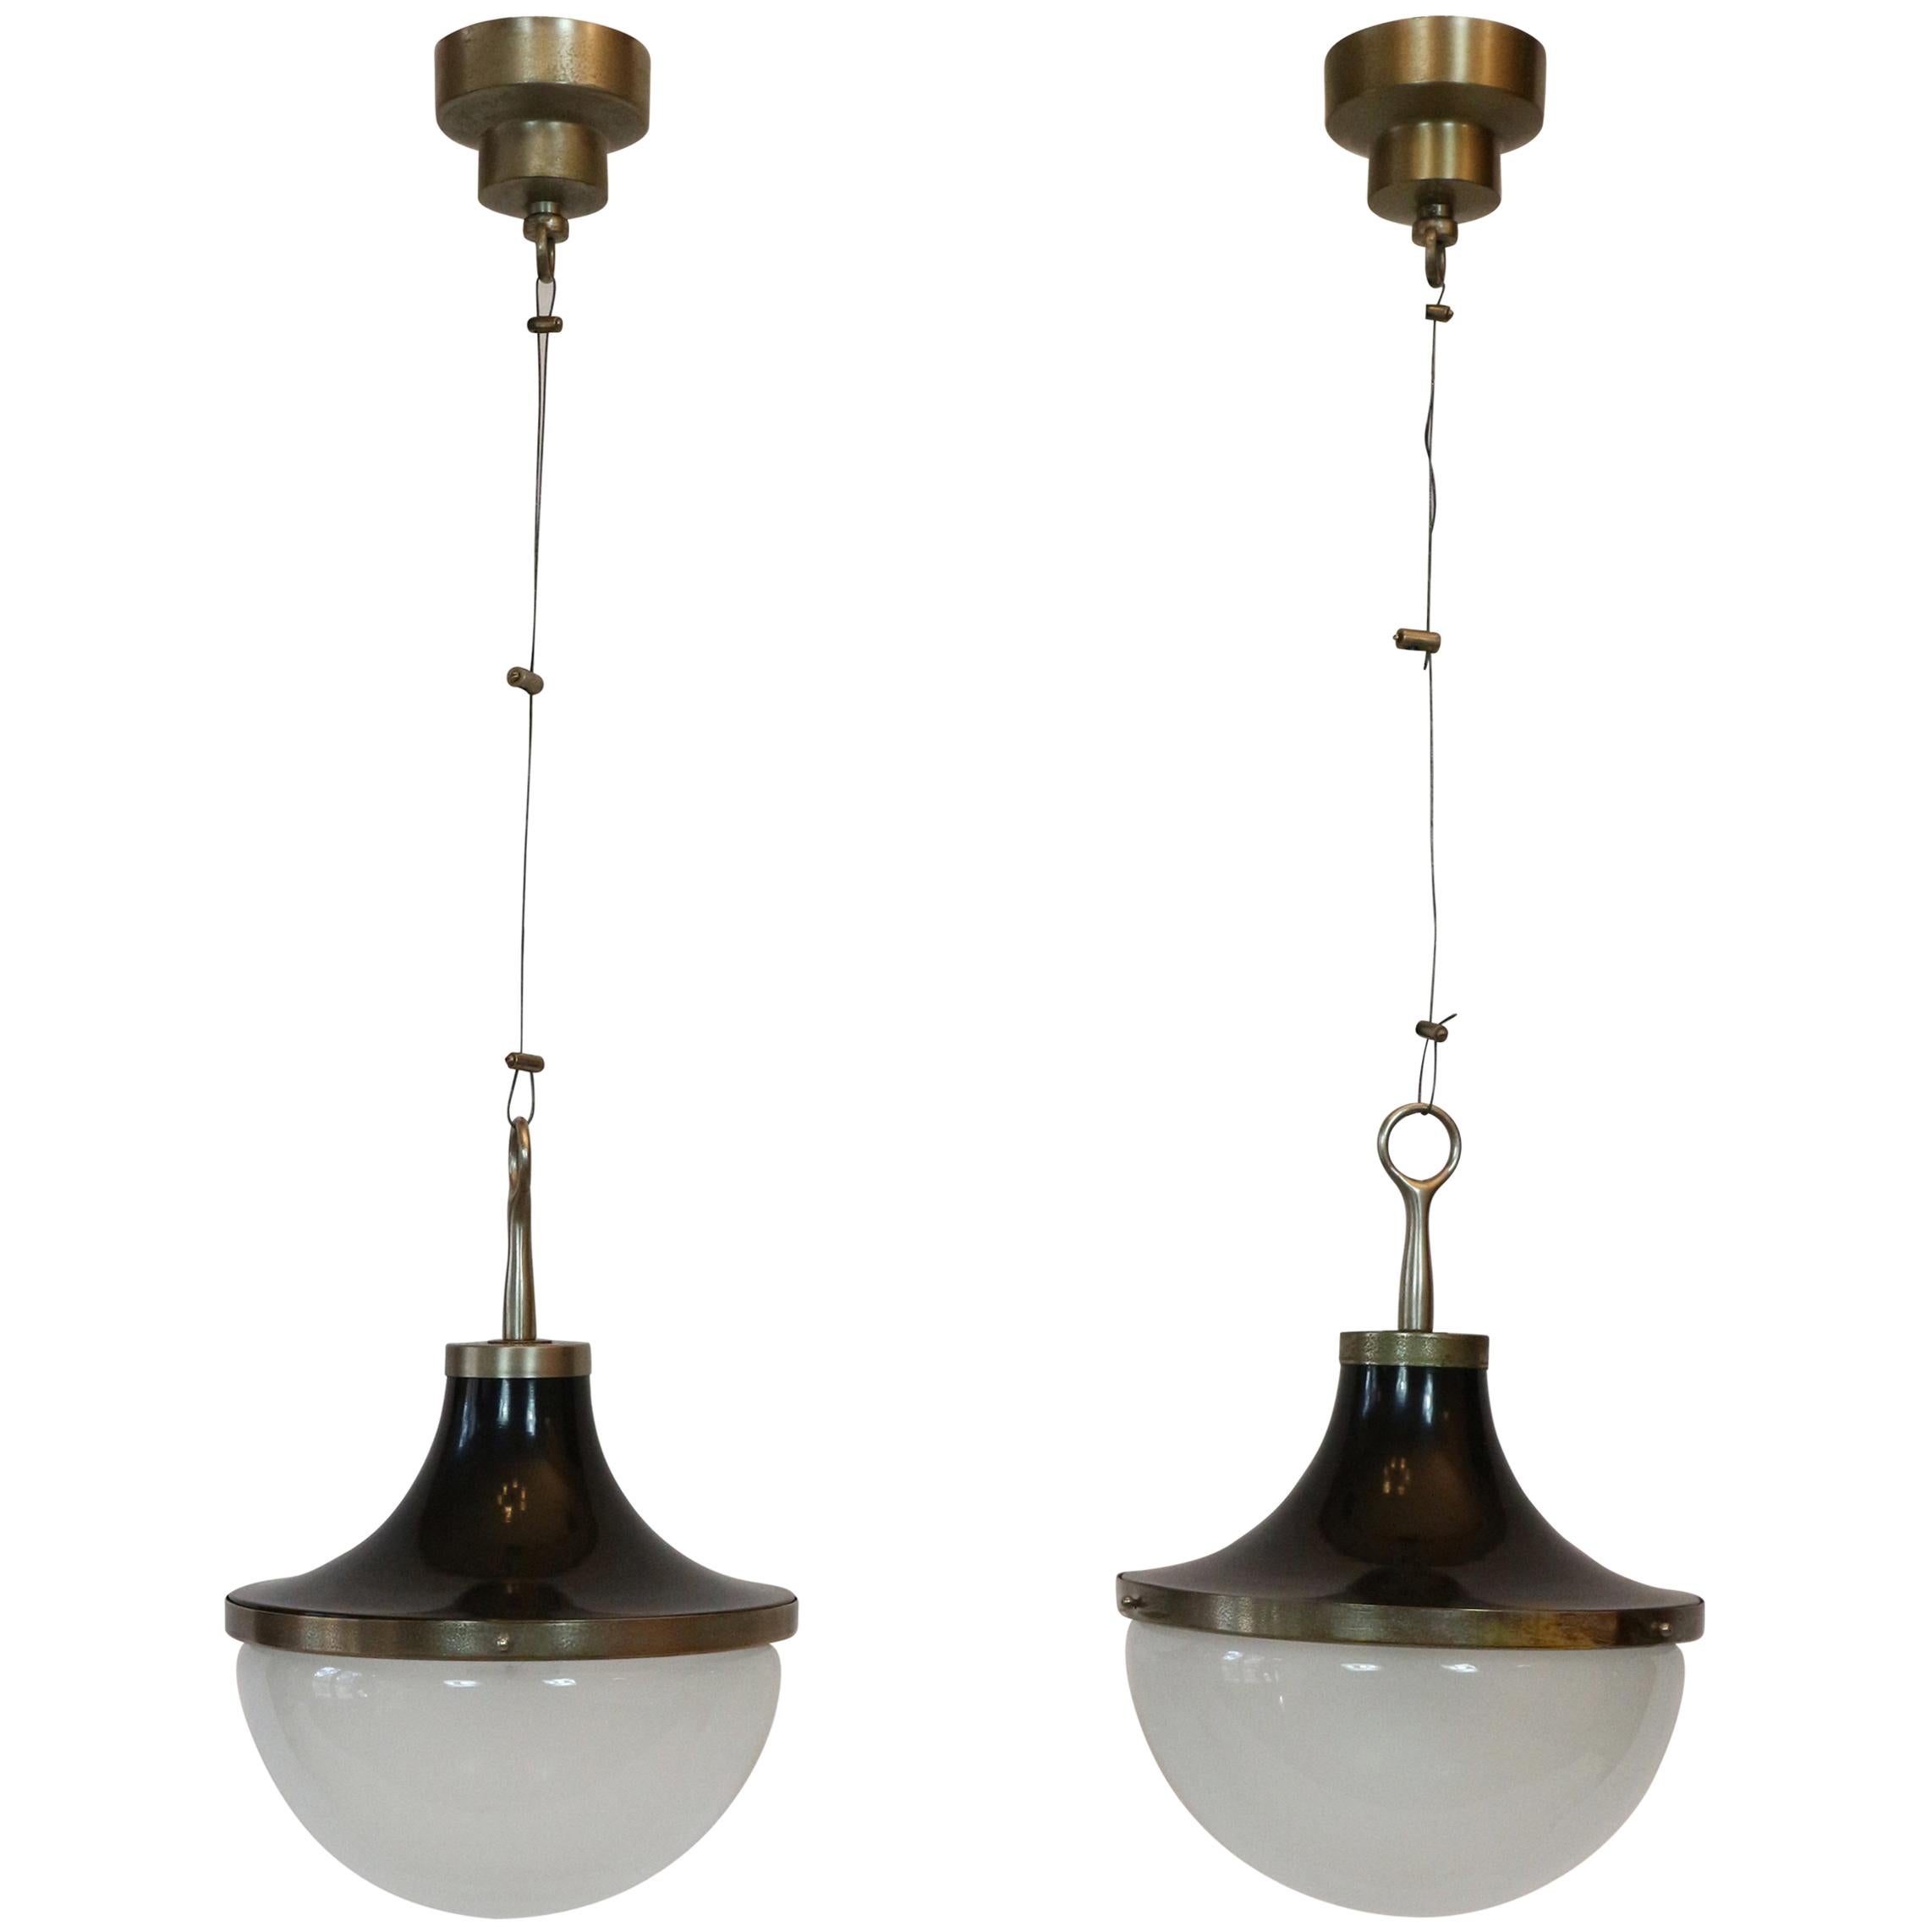 Pair of Ceiling Pendants Design by Sergio Mazza for Artemide "Picavo"